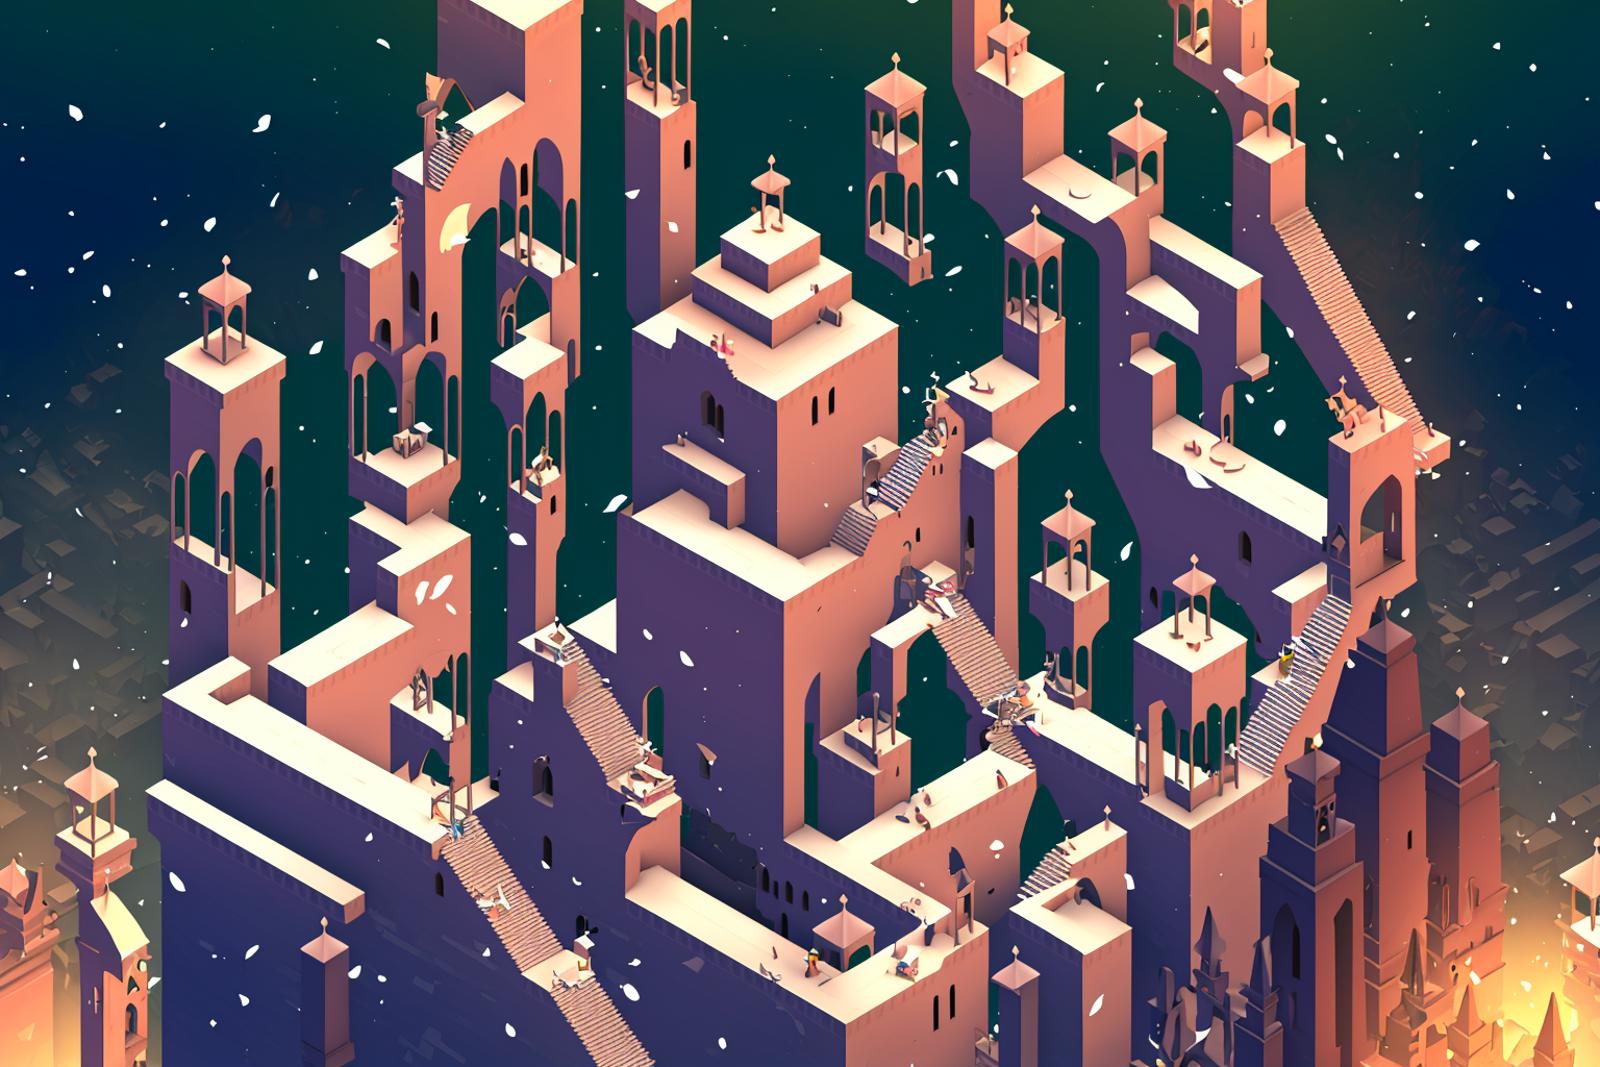 Geometric & Angular Backgrounds (Monument Valley Influence) image by Insult_to_Ninjary